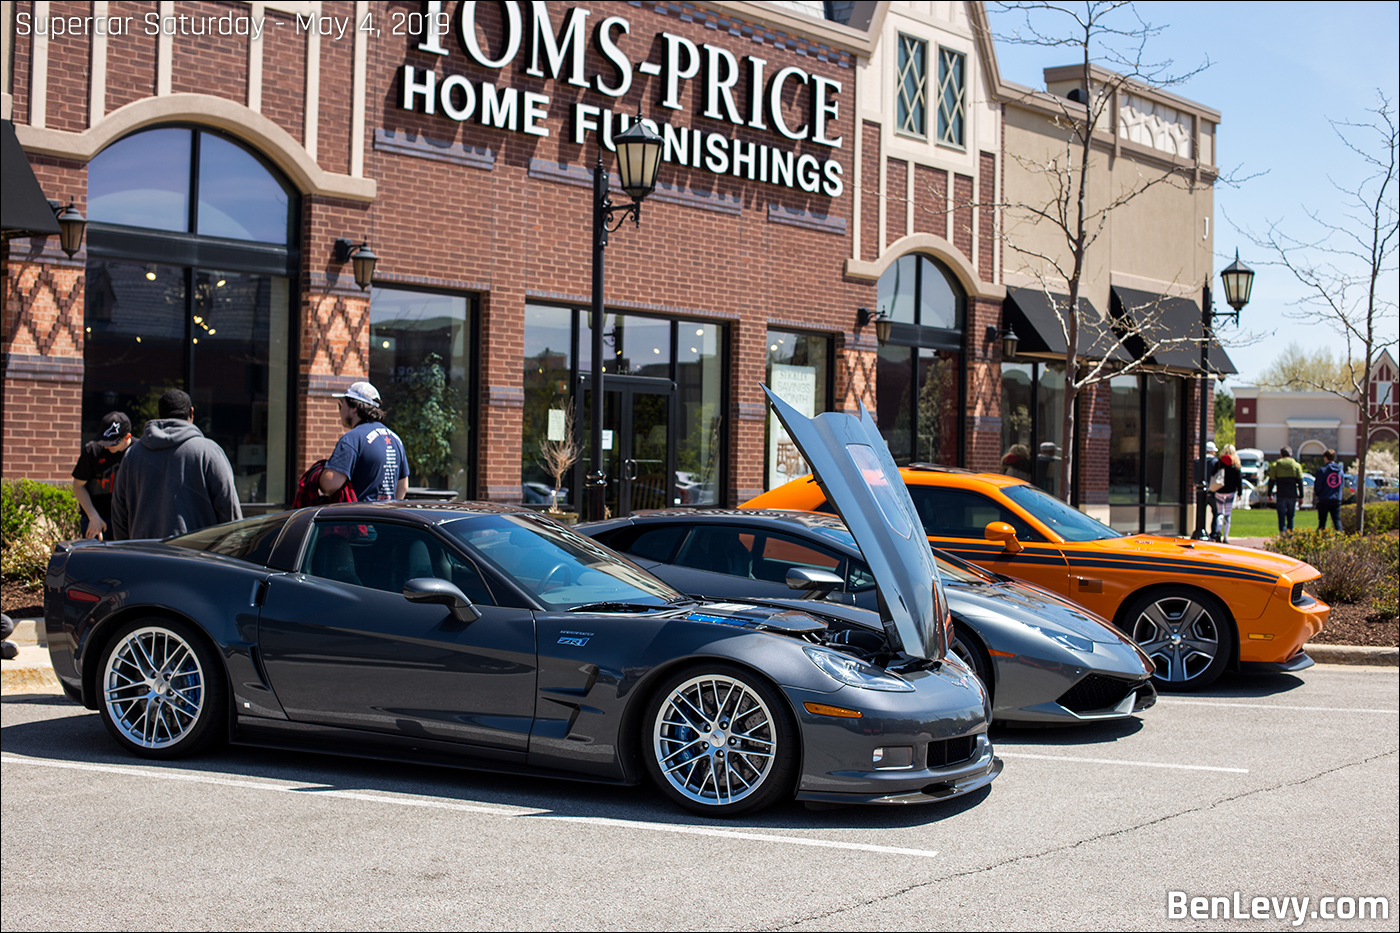 Corvette ZR1, Huracan, and Challenger at Supercar Saturday